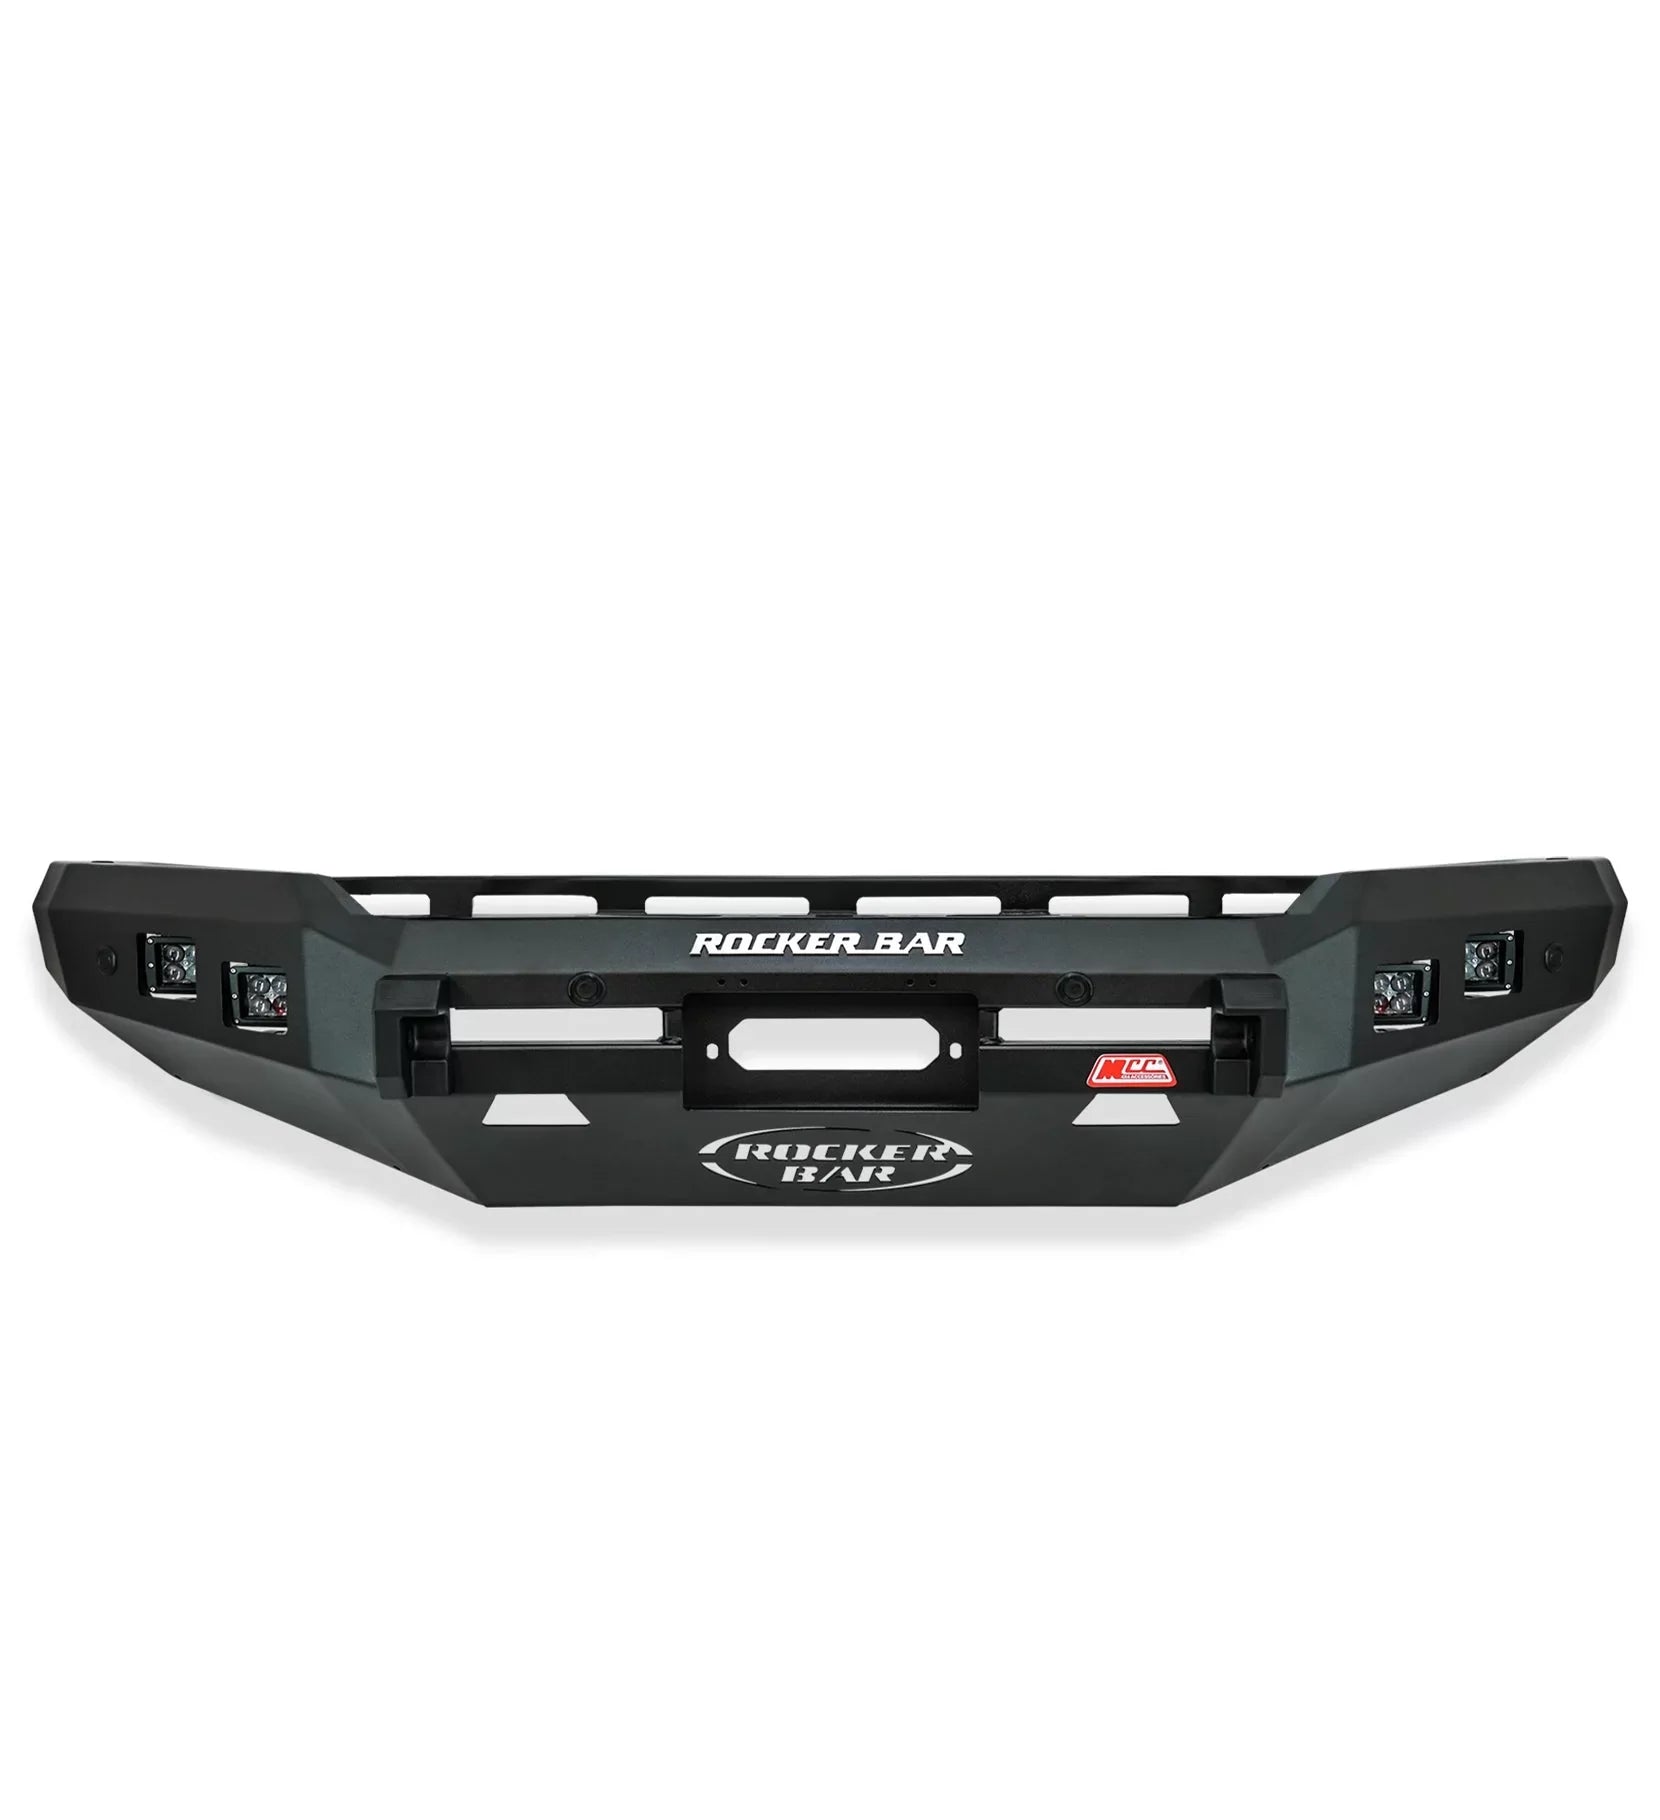 Colorado Rg/7 Wagon 12-16 078-01sq Rocker Front Bar Square Light No Loop + Bracket + Underprotection Plate If Available